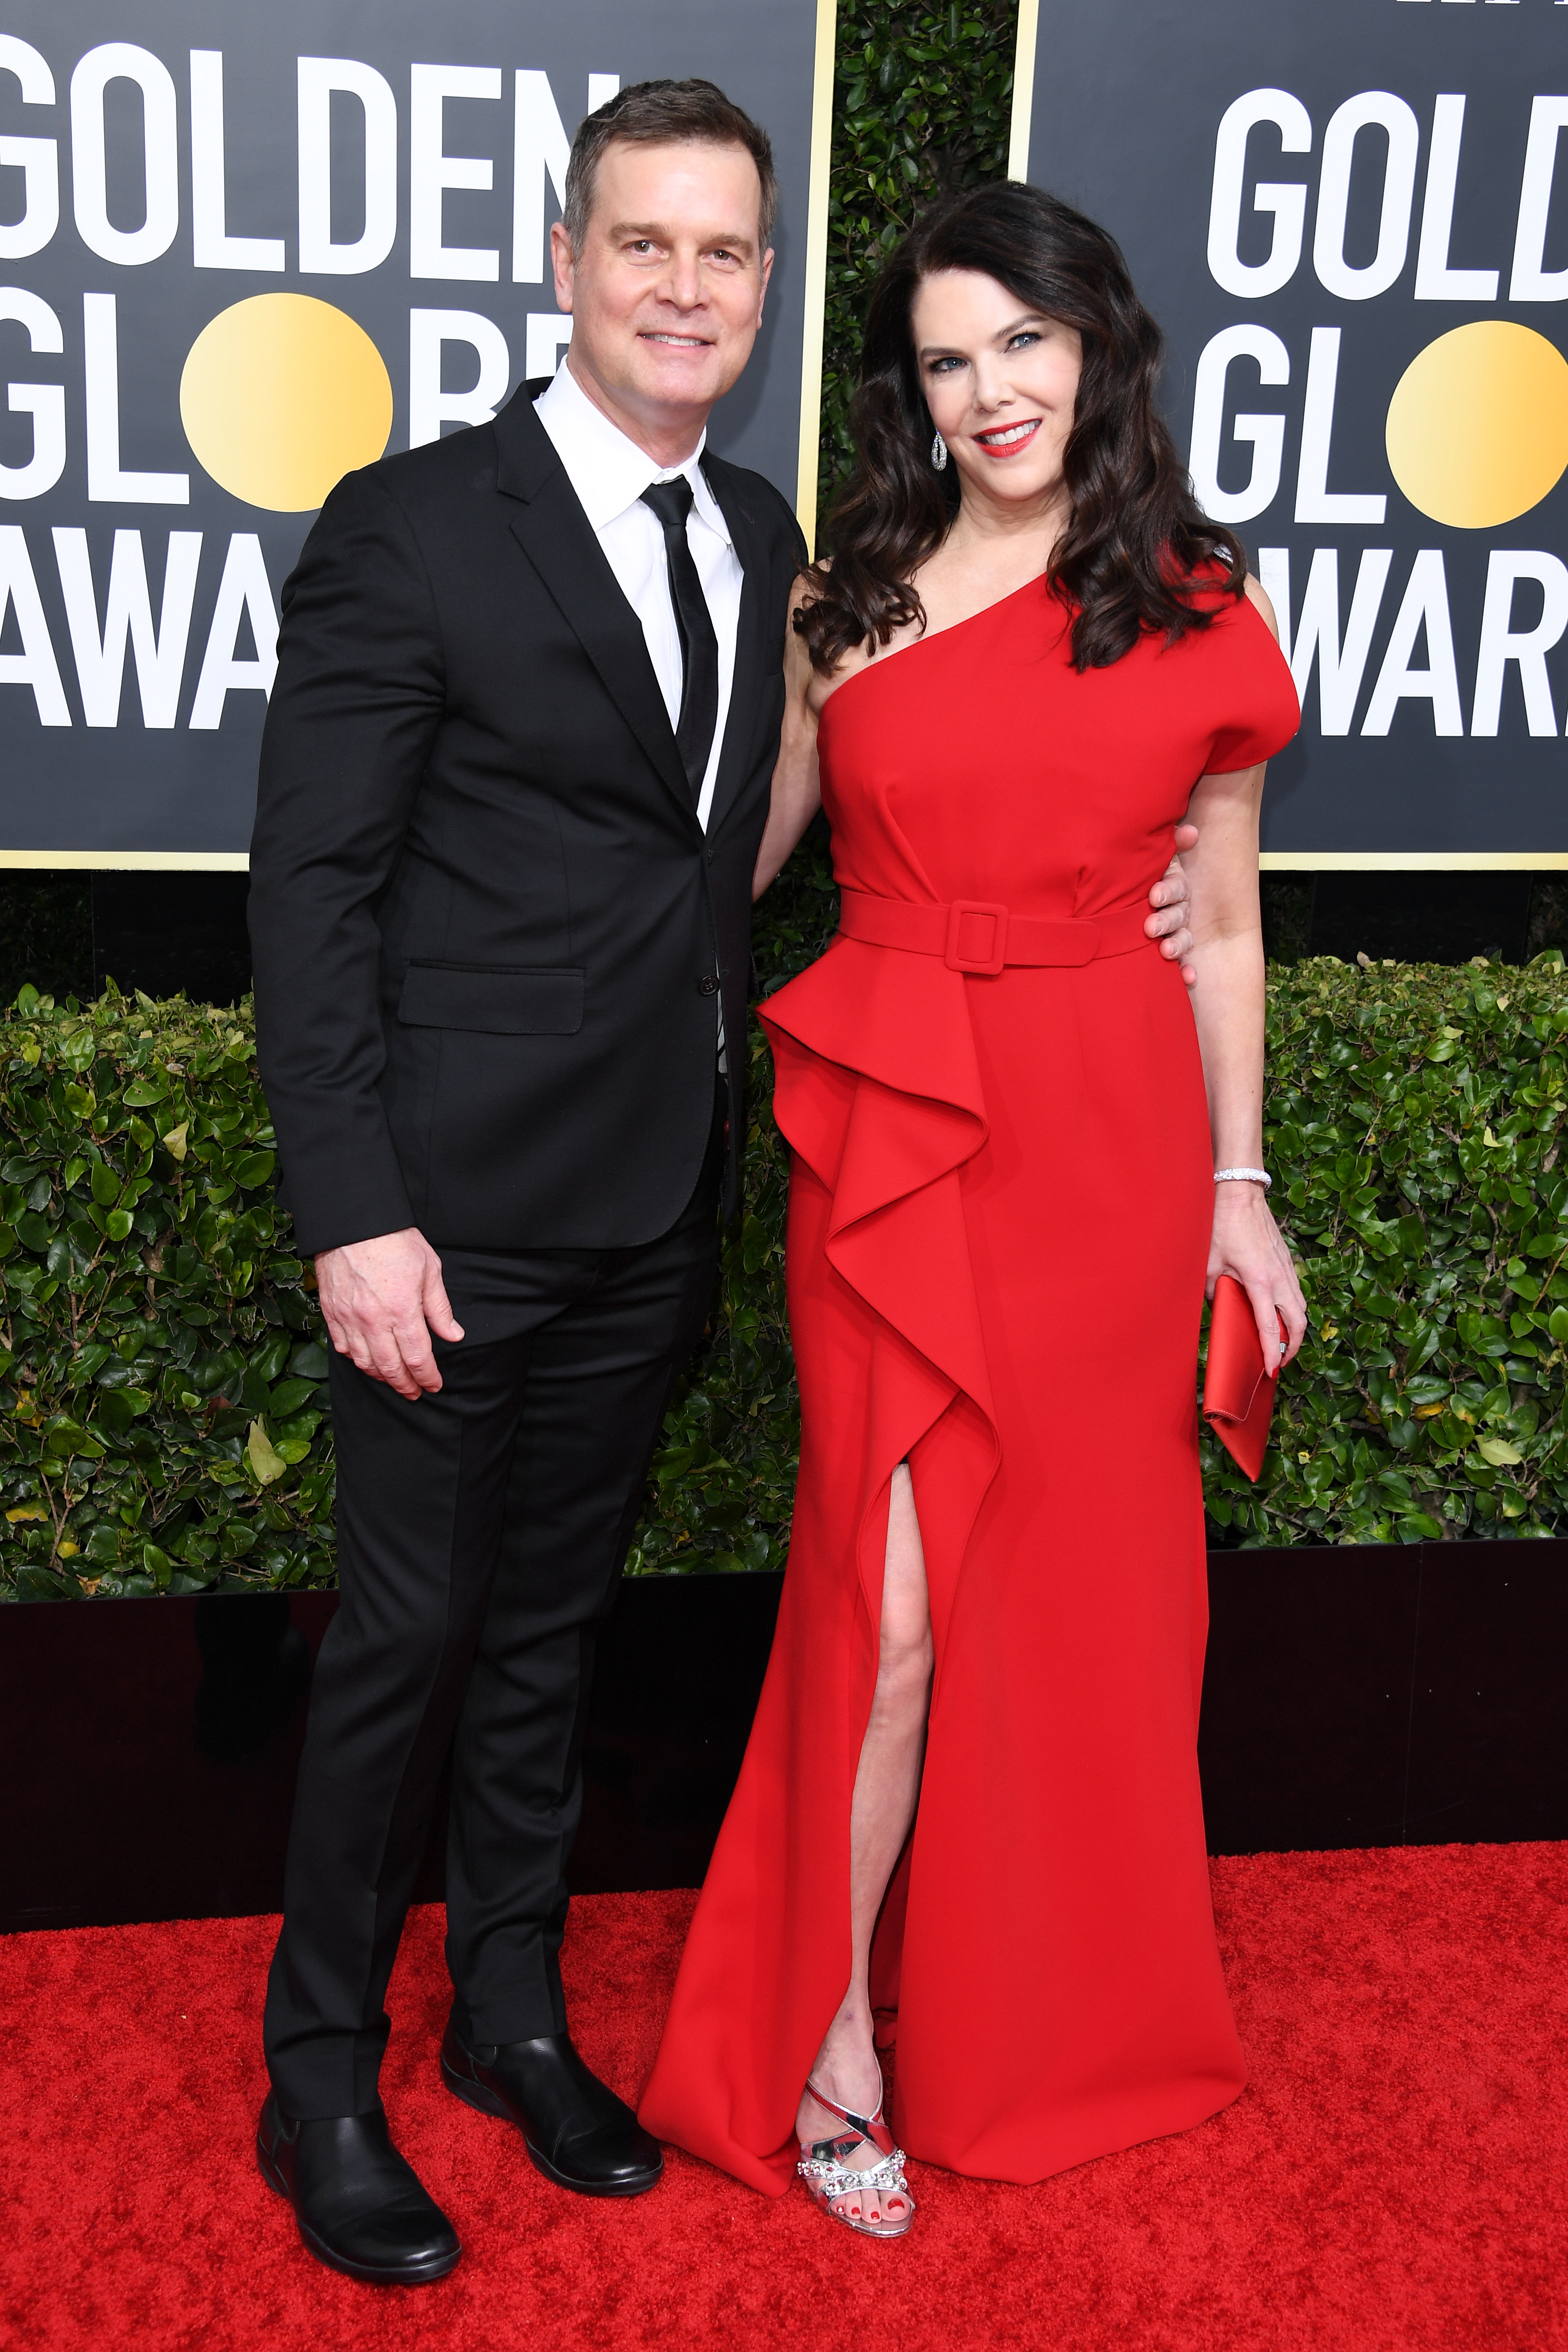 Peter Krause and Lauren Graham attend the 77th Annual Golden Globe Awards at The Beverly Hilton Hotel on January 5, 2020 in Beverly Hills, California. | Source: Getty Images